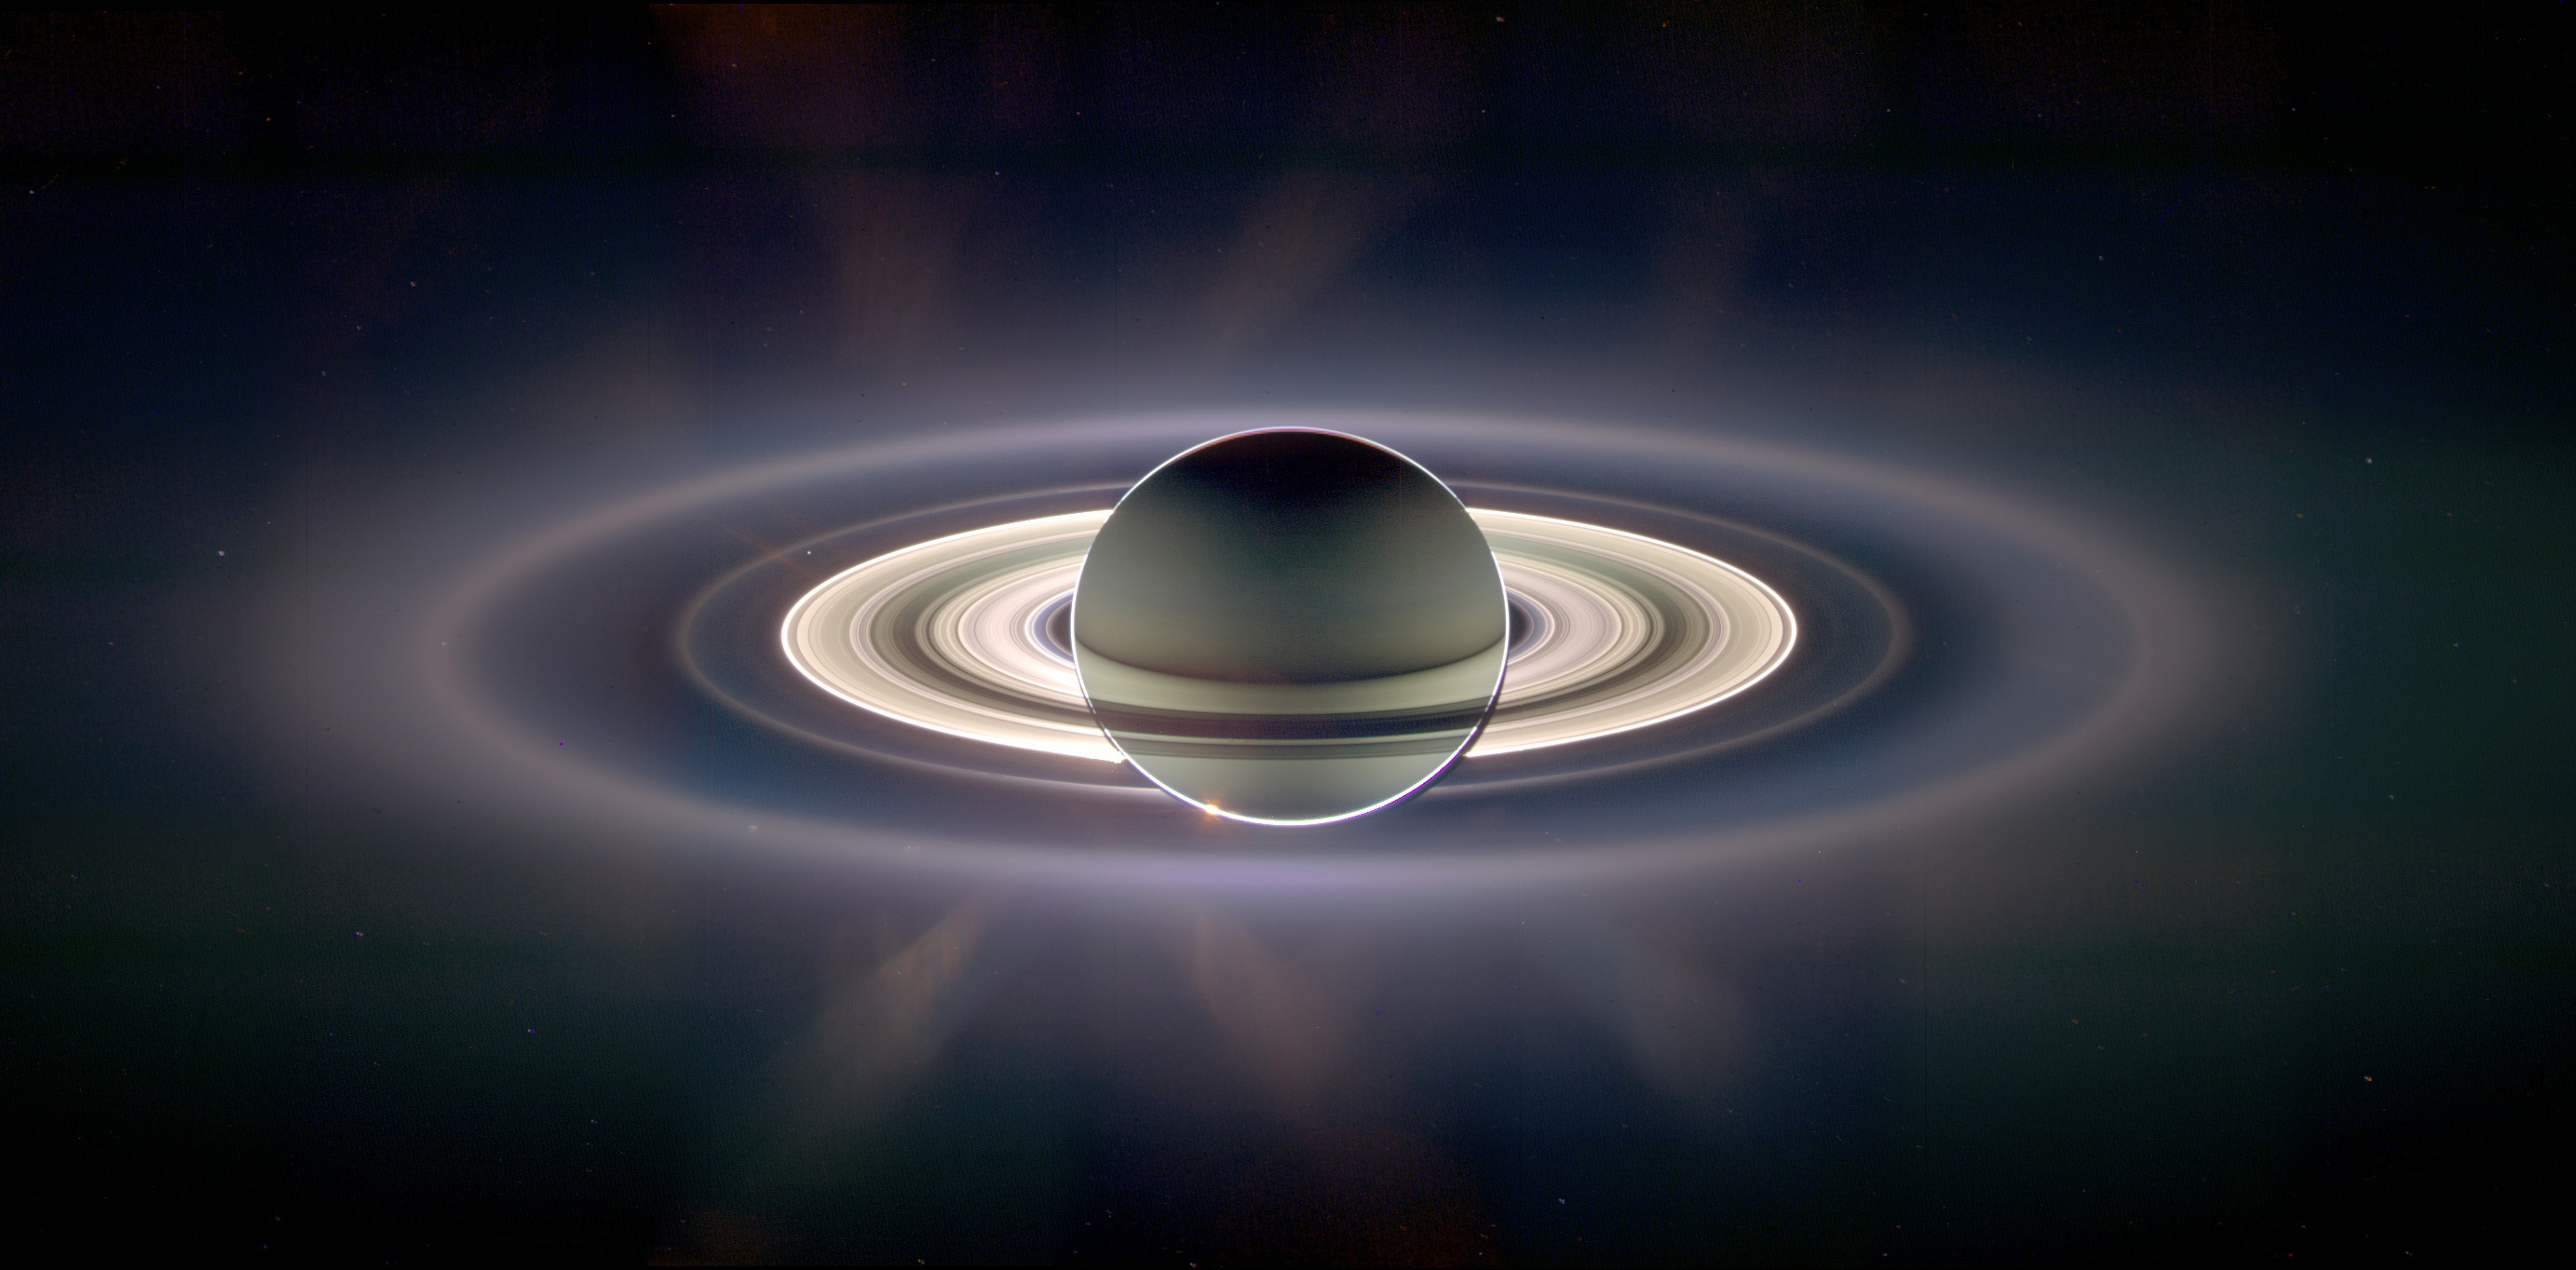 APOD: 2006 October 16 - In the Shadow of Saturn